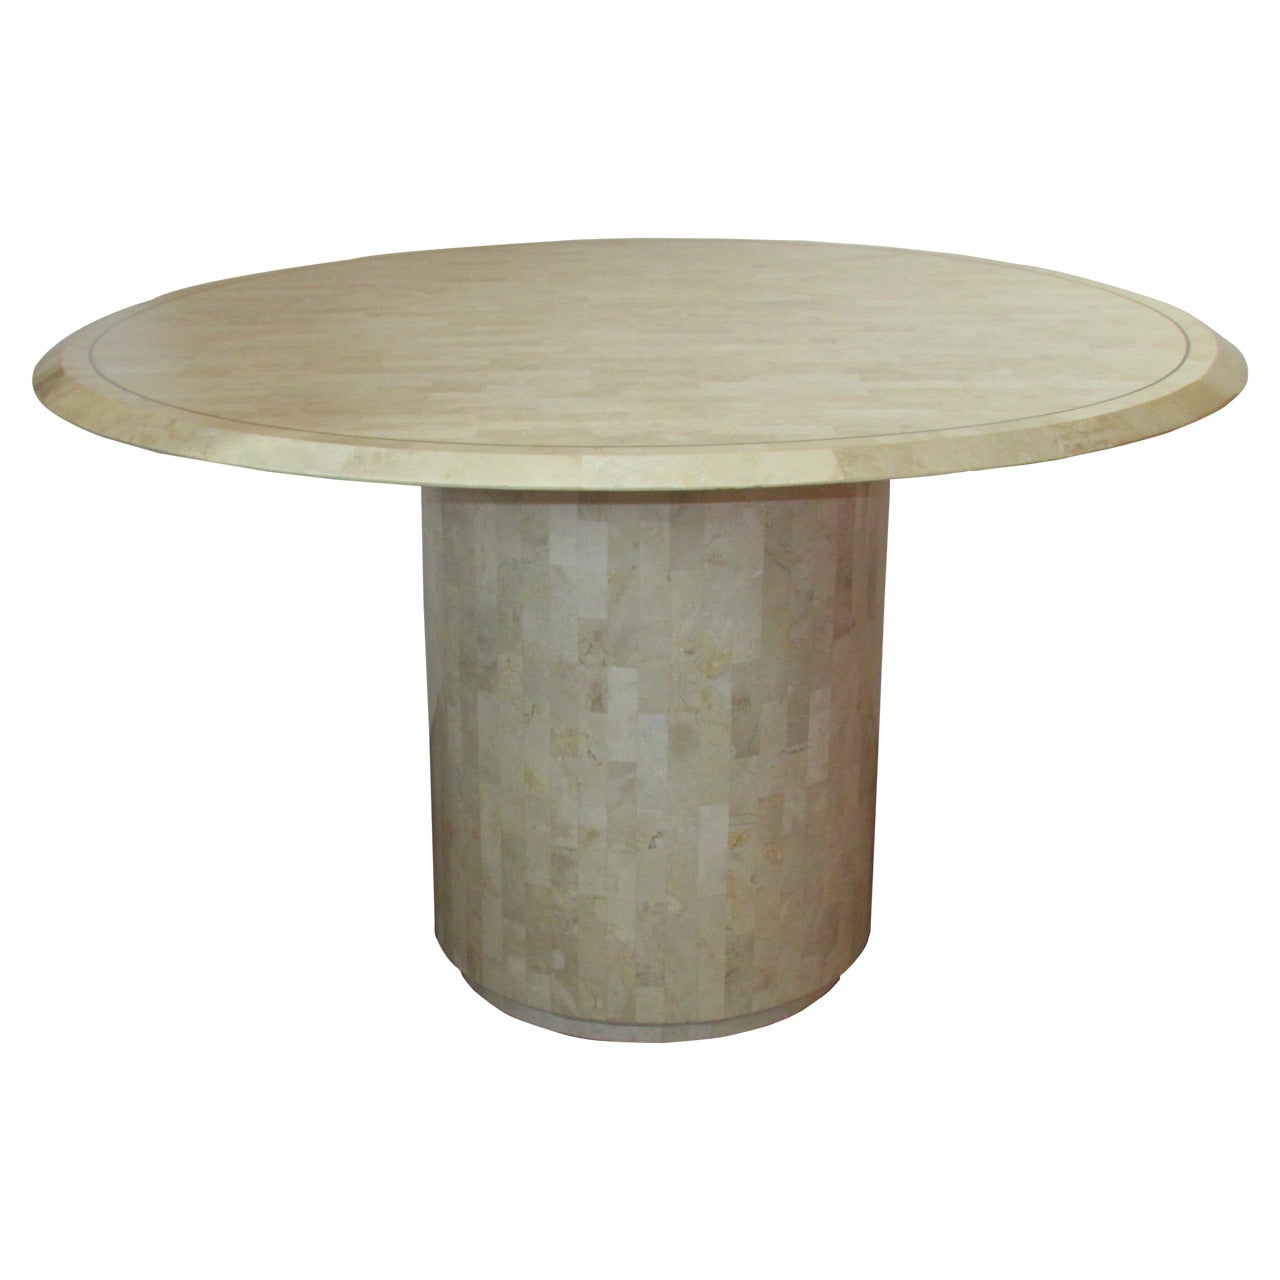 Karl Springer Style Tessellated Stone Pedestal Dining Table